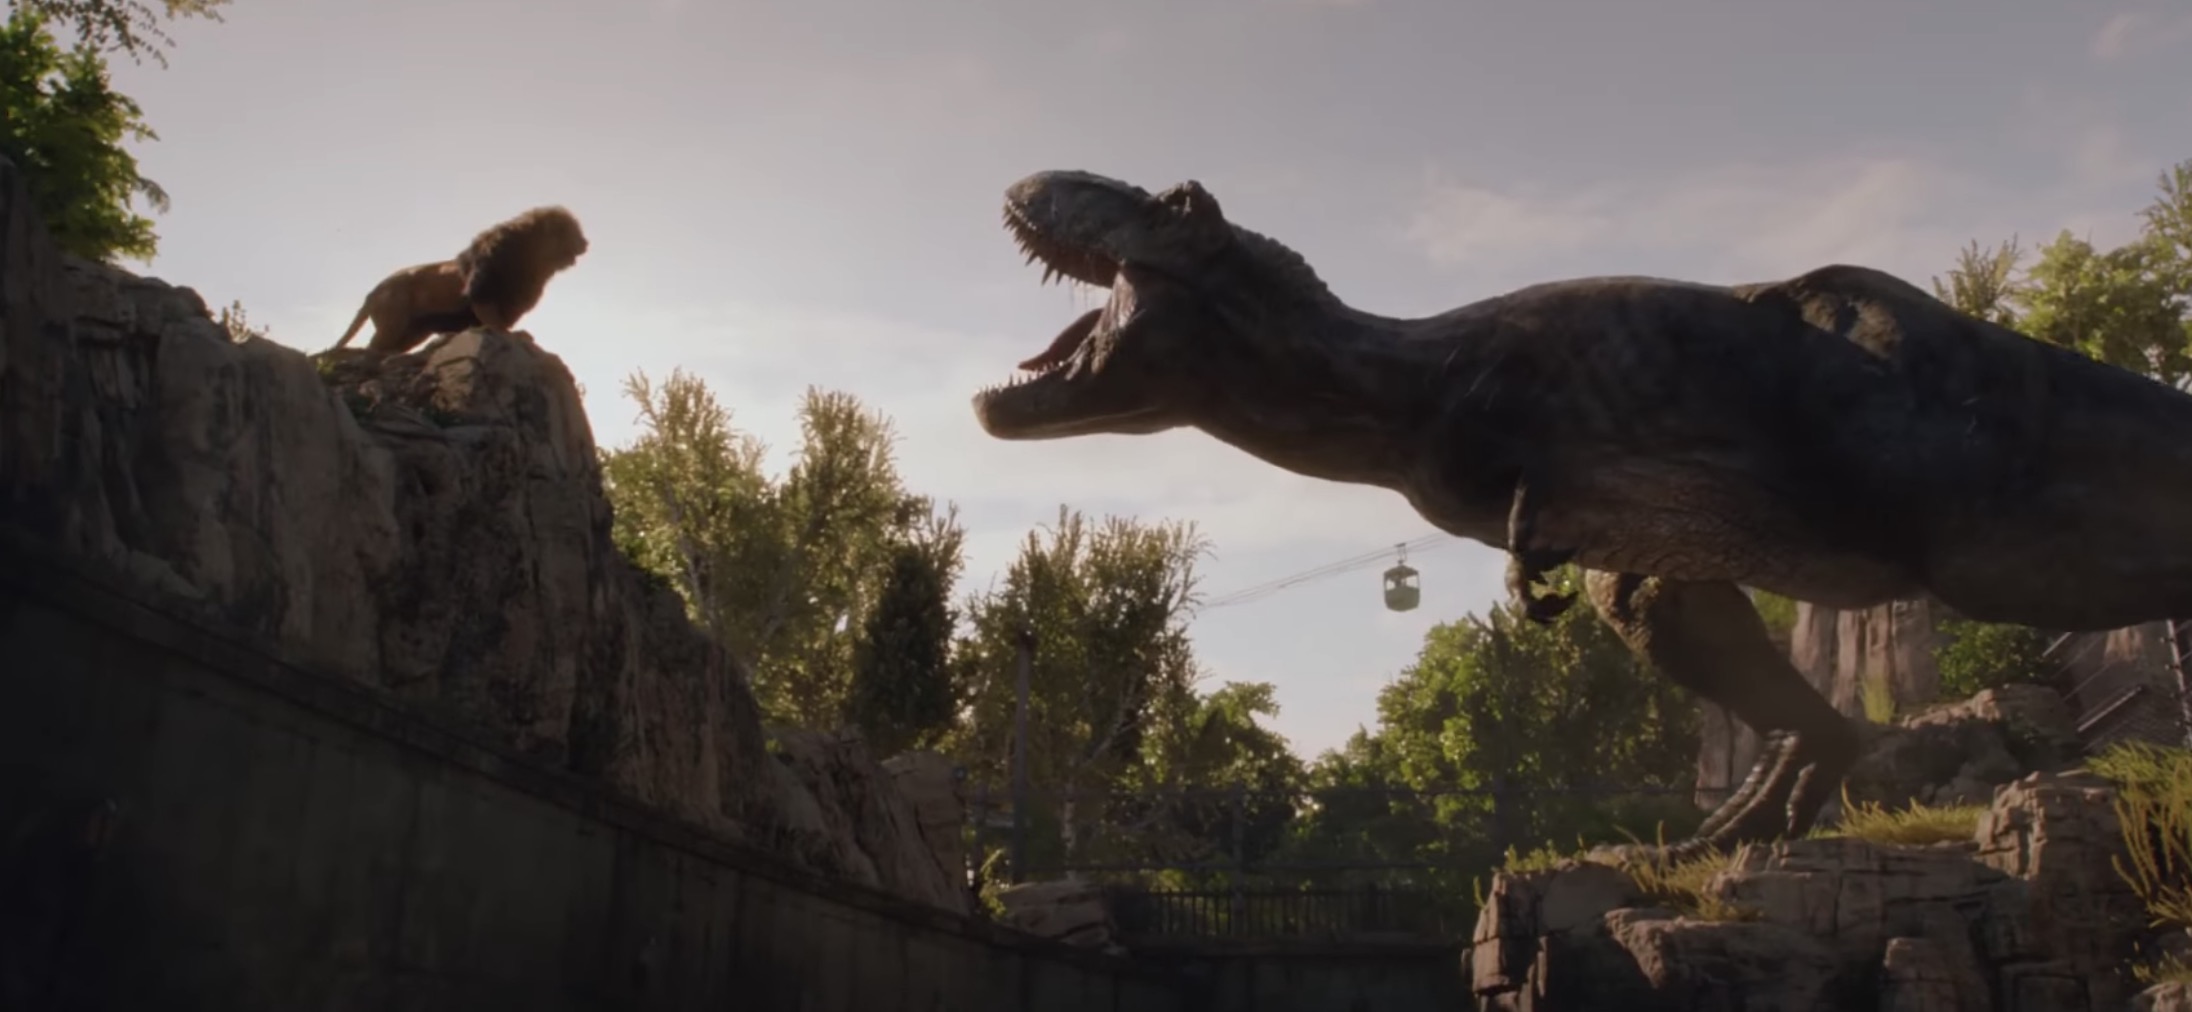 The Makers Of Jurassic World: Fallen Kingdom Solve Some Of The Film’s Big Mysteries